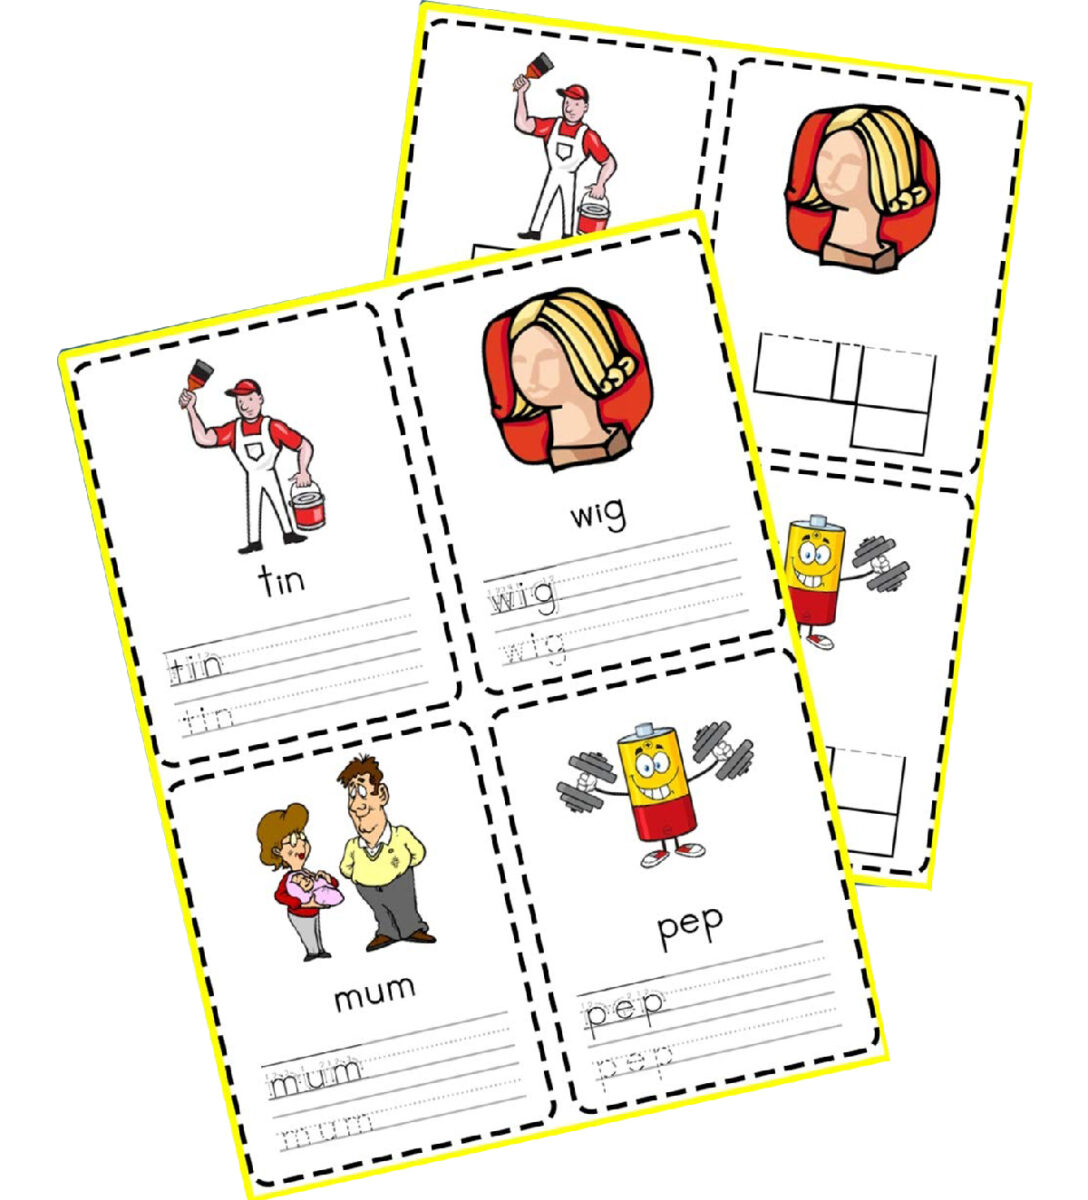 CVC Words Flash Cards is a game for developing reading fluency.